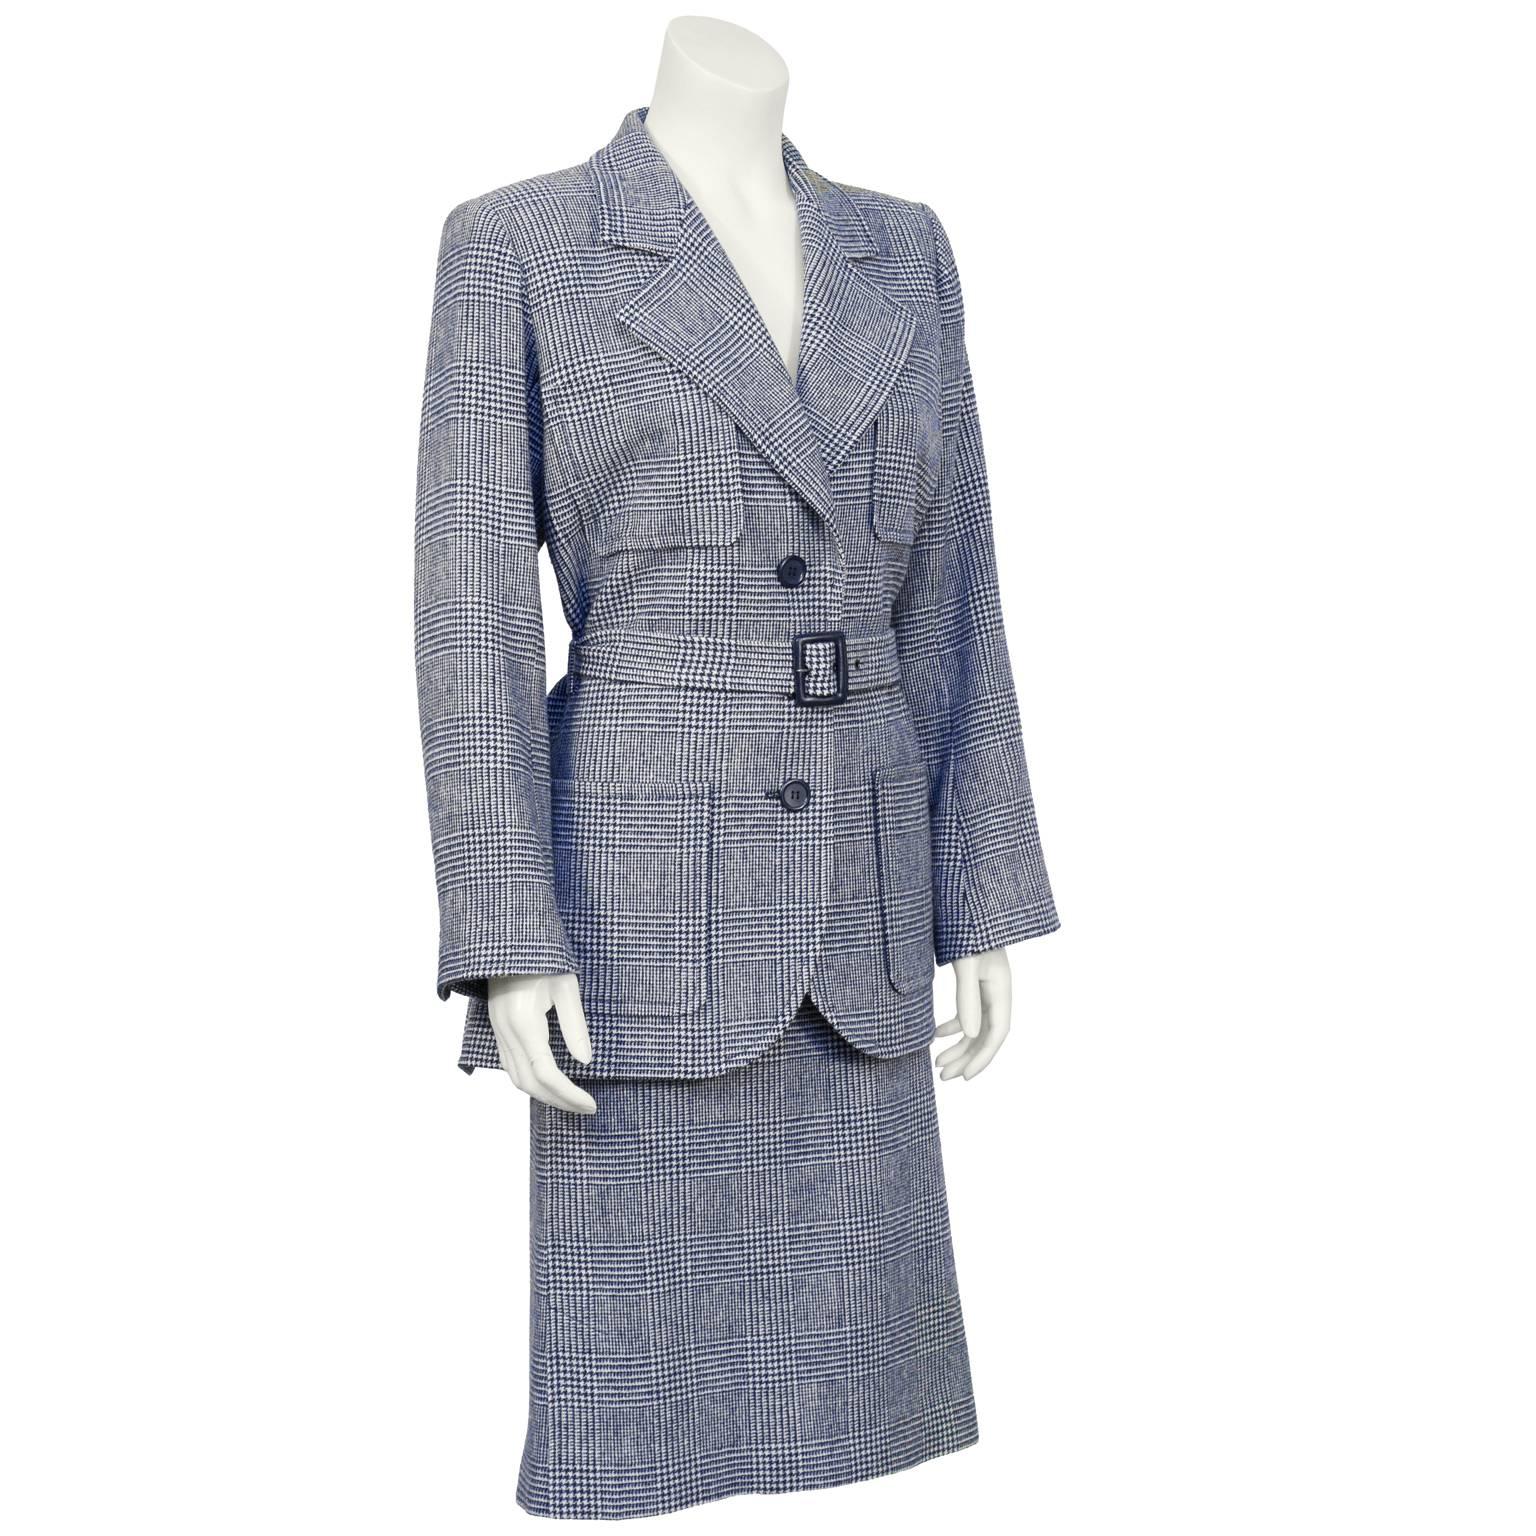 Blue and cream wool checked houndstooth Yves Saint Laurent suit from the 1970's. The Safari style jacket has a notched lapel, four front patch pockets and a belt at the natural waist. The skirt has a banded waist, side slits and zips up the side. In